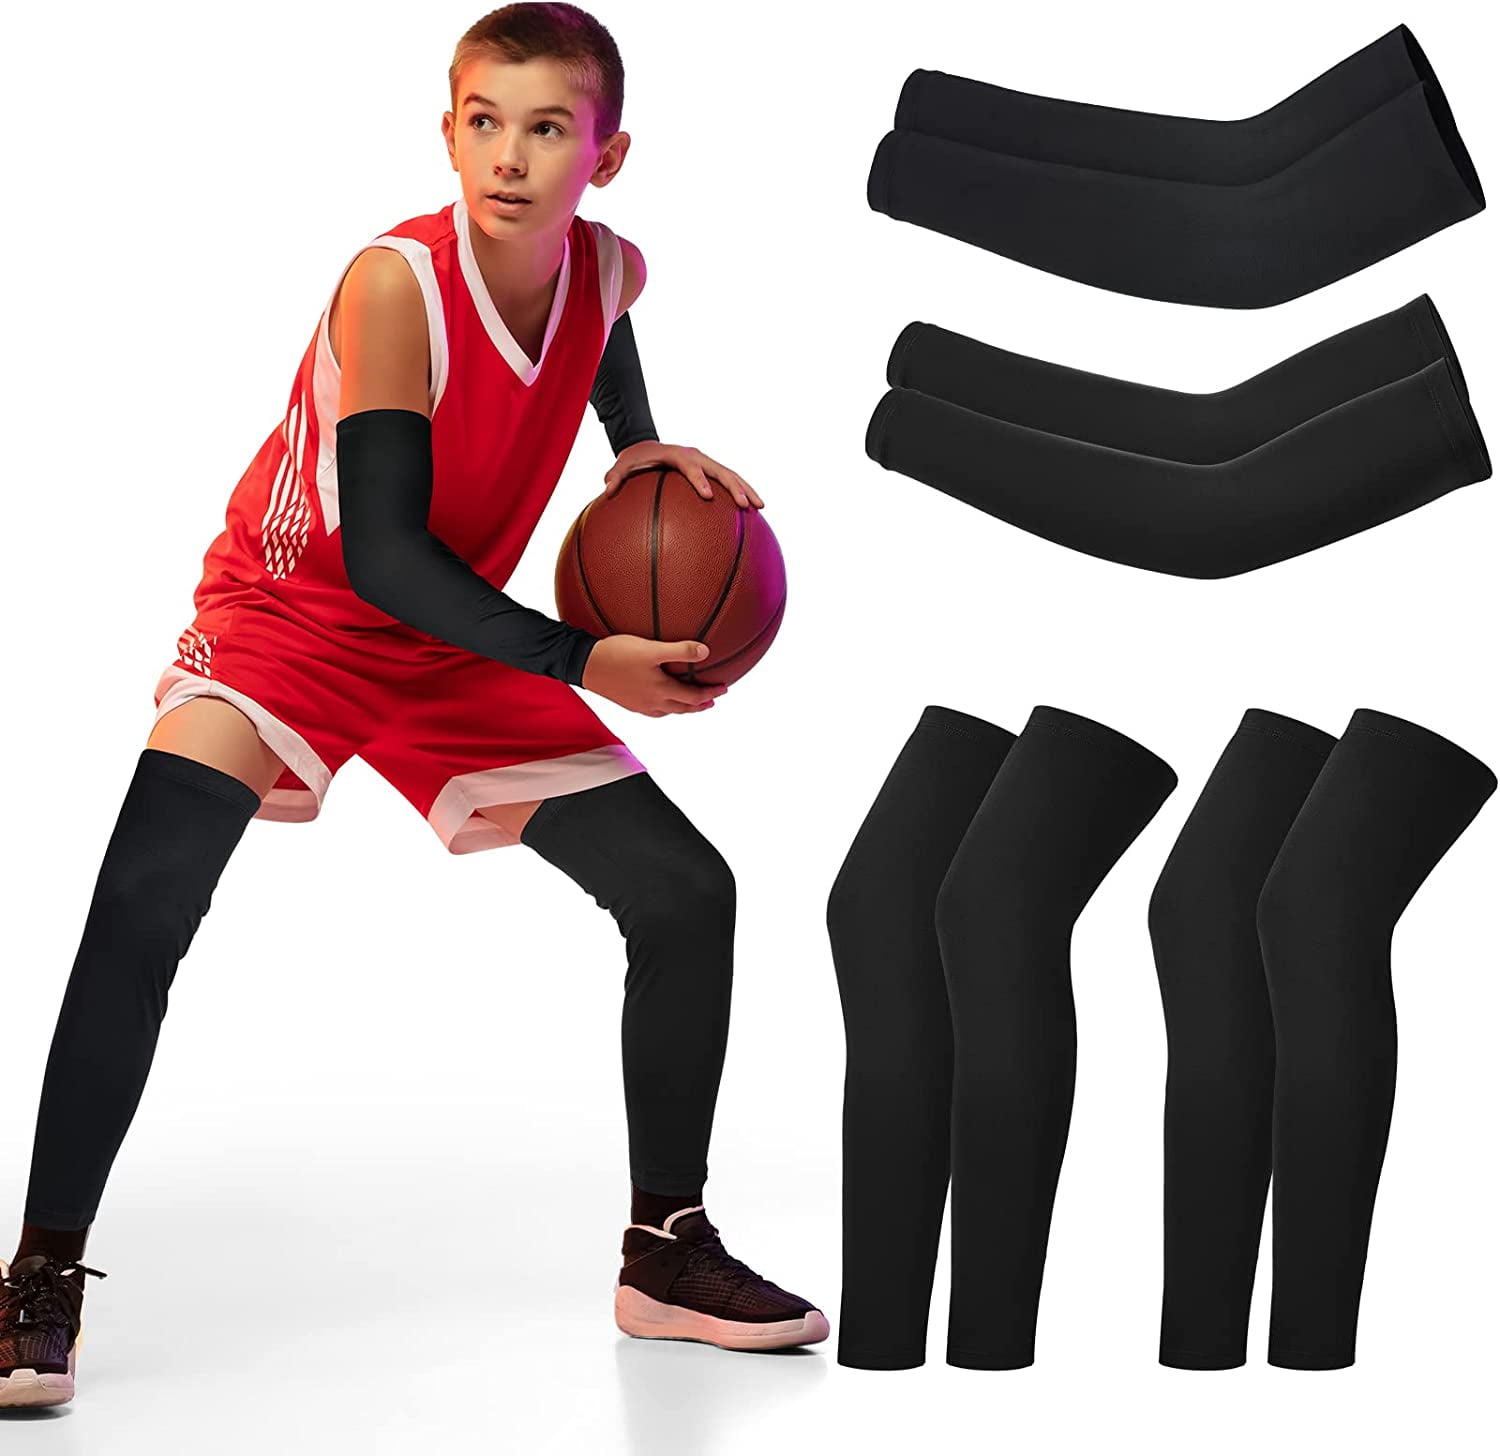  4 Pieces Kids Long Compression Leg Sleeve UV Protection Full  Length for Boy Girl Youth Sports Cycling Basketball : Health & Household